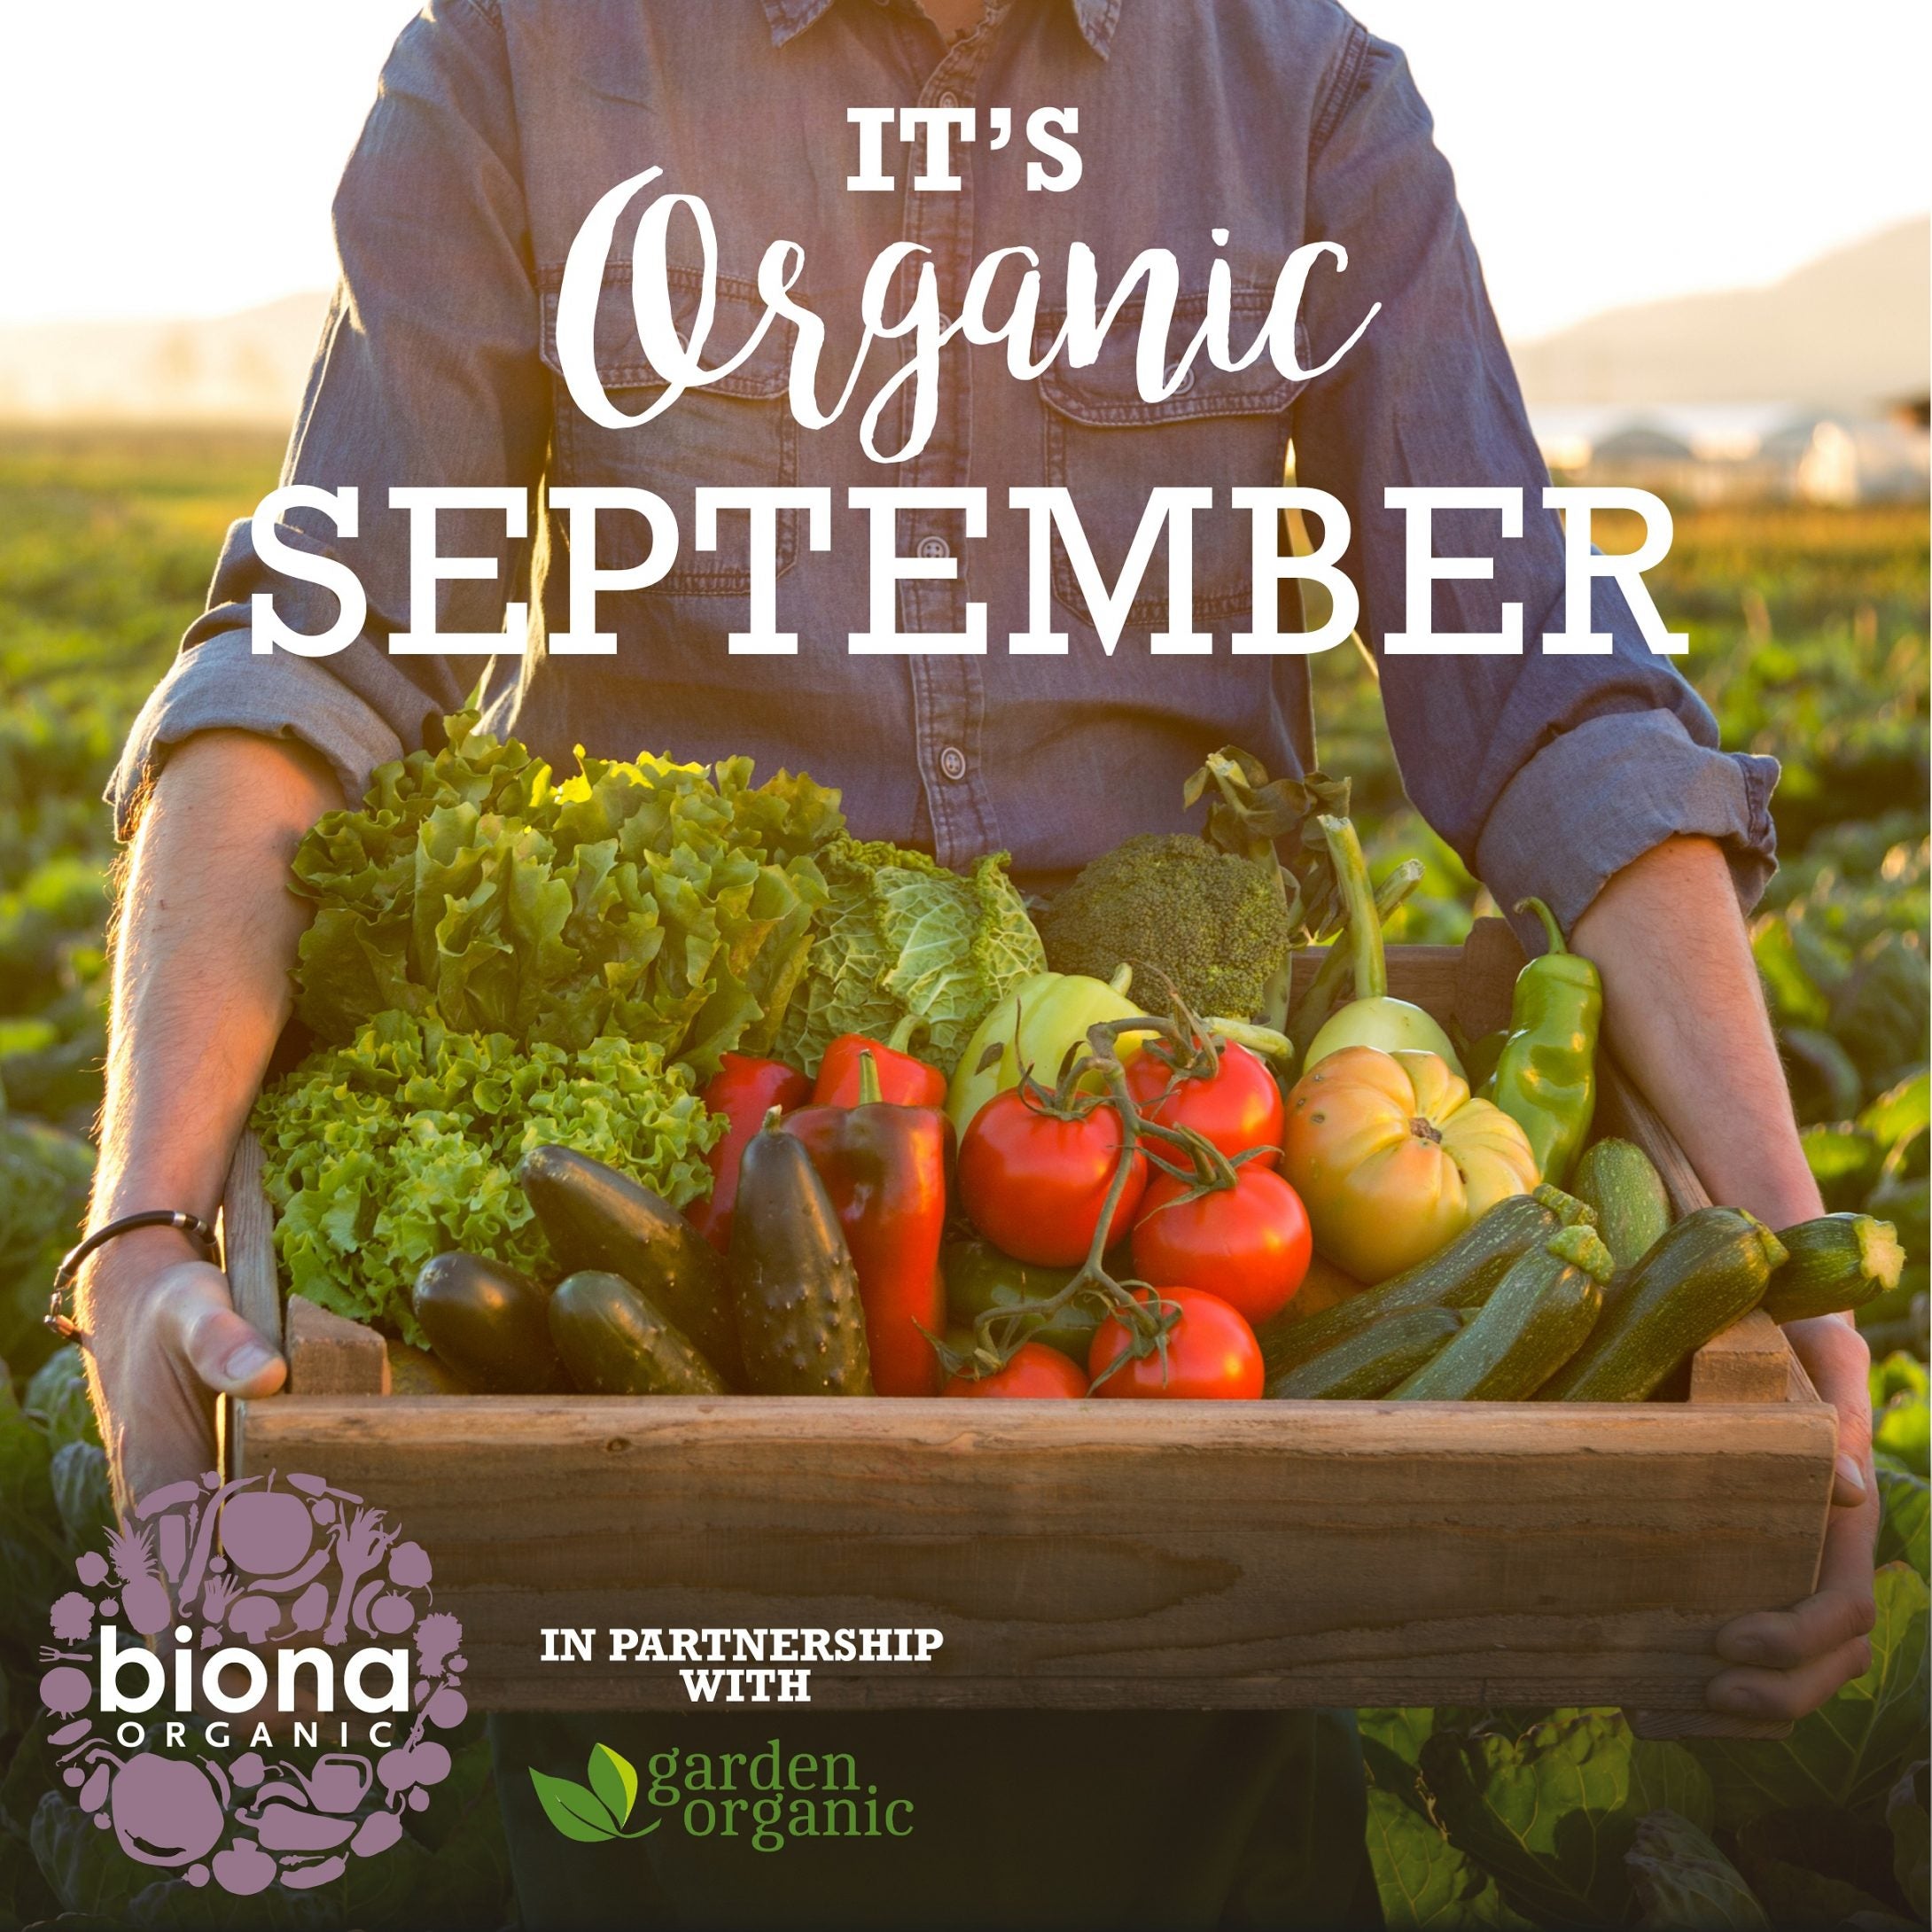 Our Partnership with Garden Organic - the National charity for Organic Growing